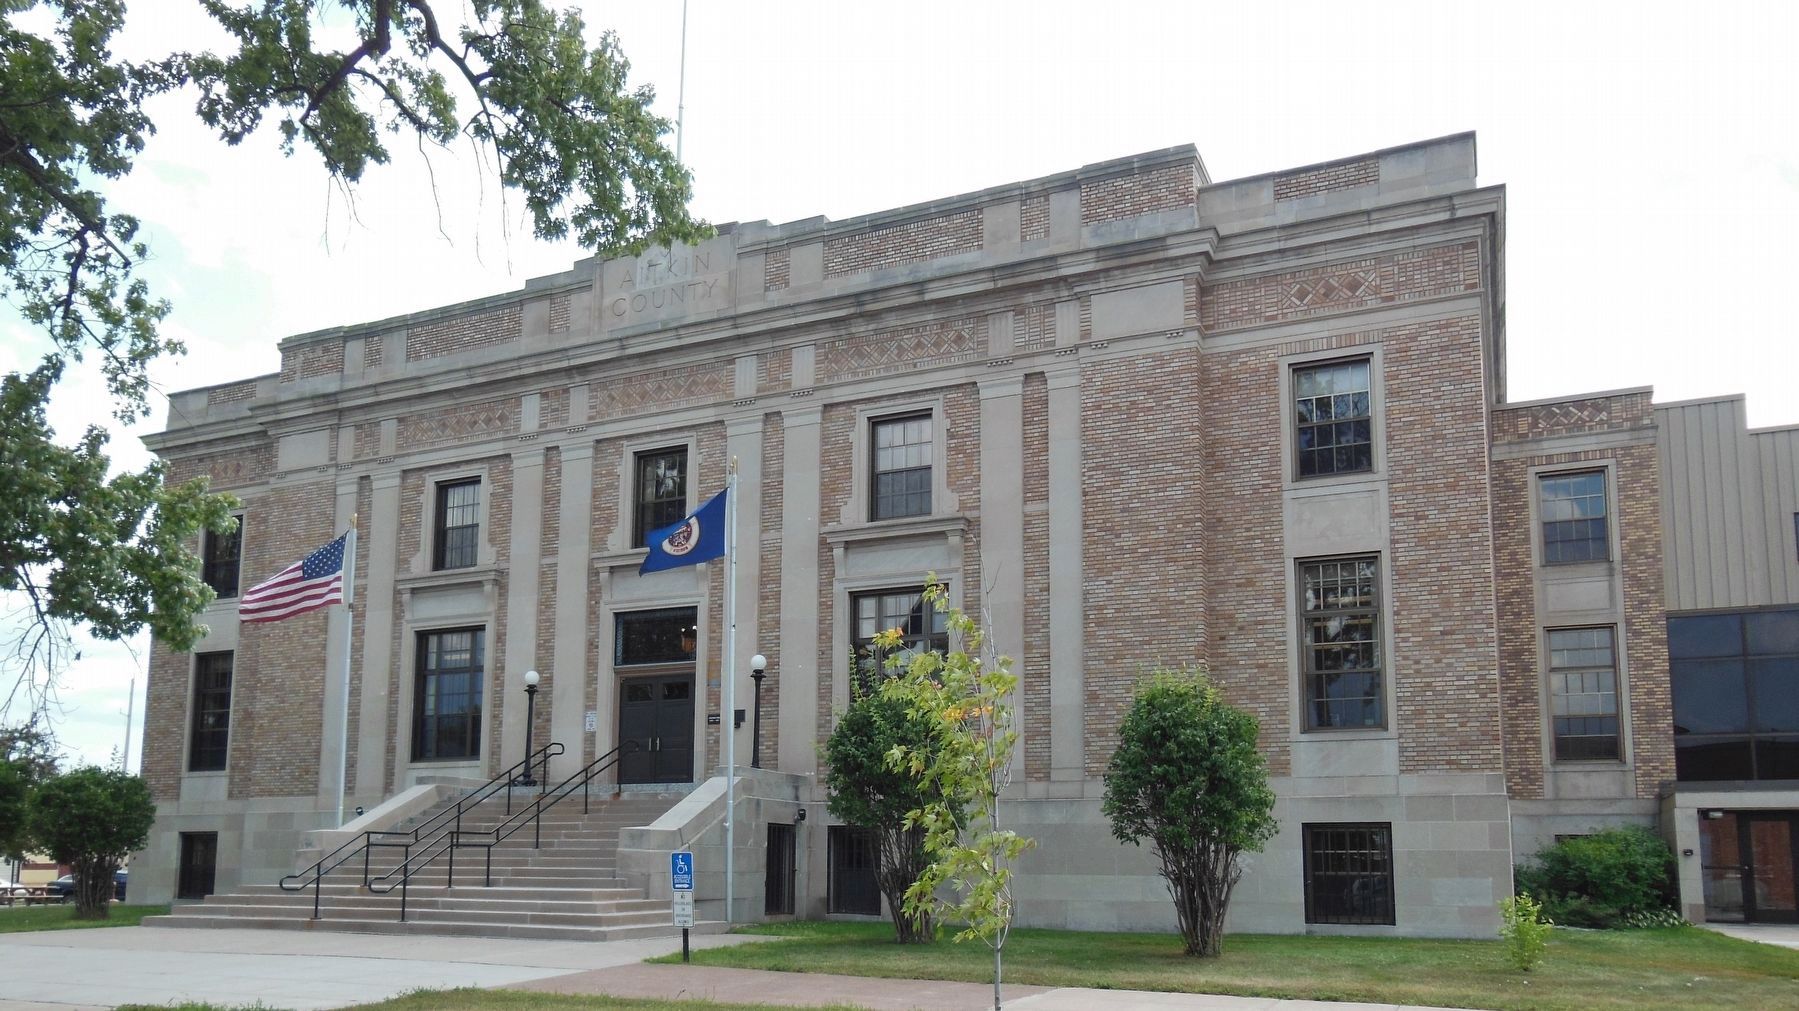 Aitkin County Courthouse (<b><i>front view</b></i>) image. Click for full size.